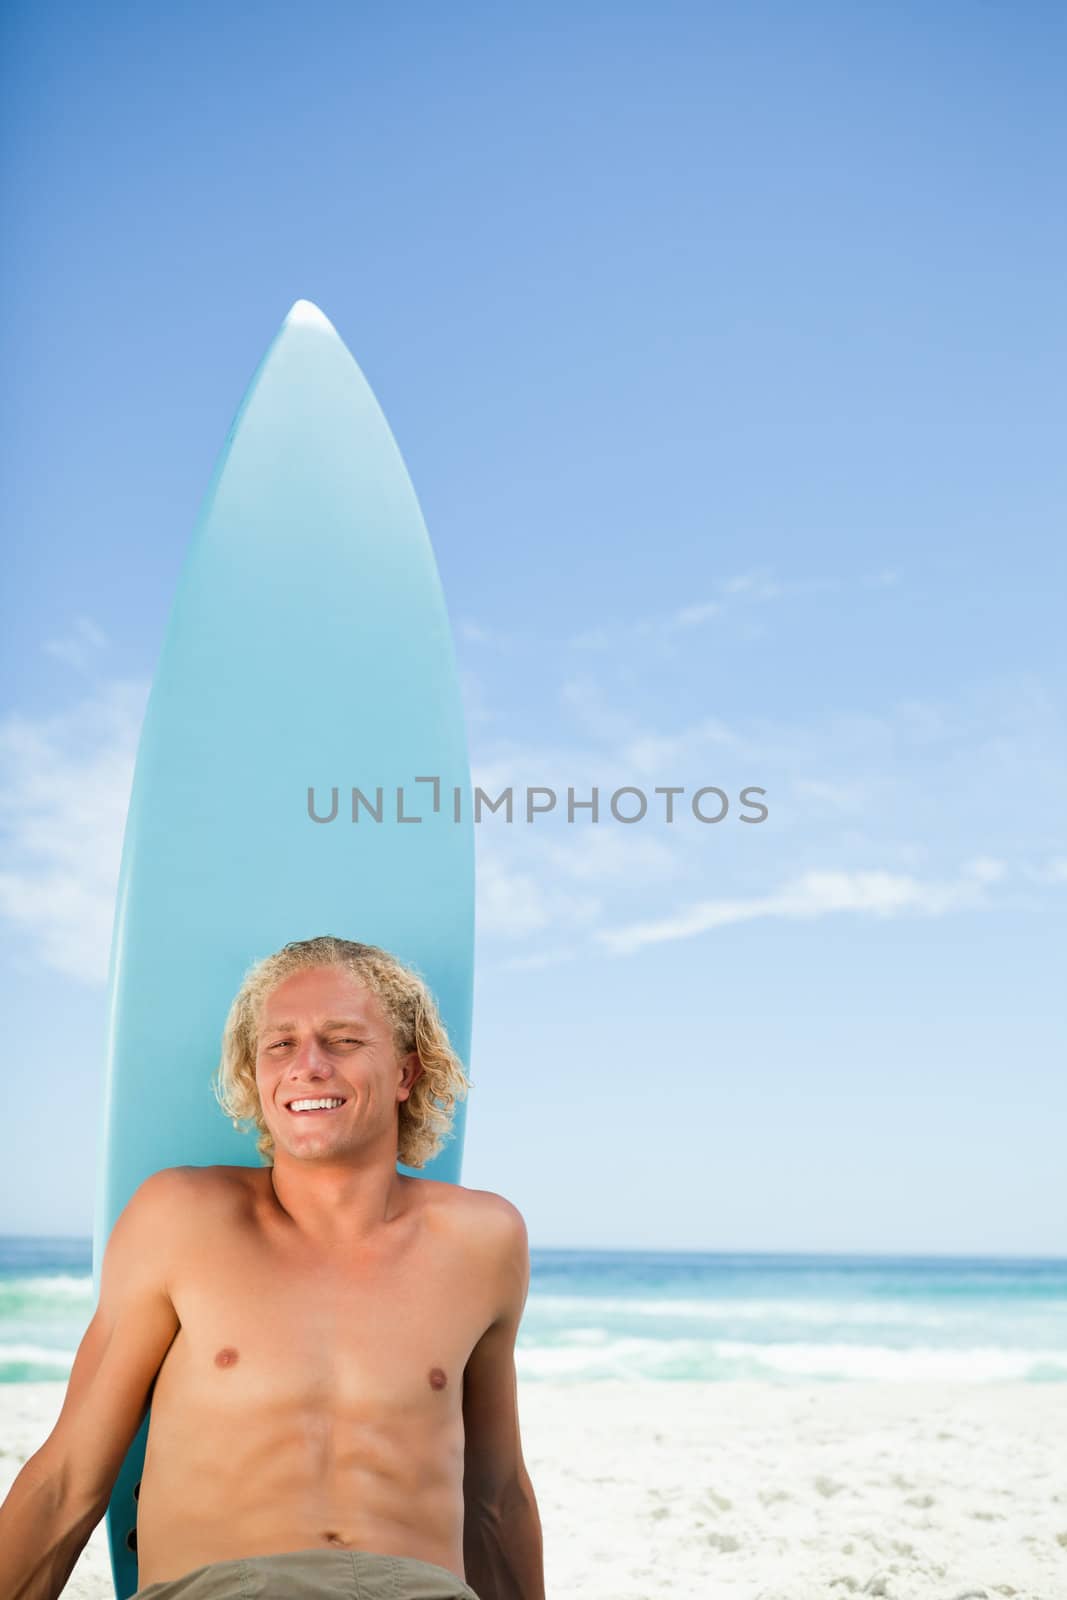 Smiling blonde man sunbathing on the beach with his surfboard next to him by Wavebreakmedia